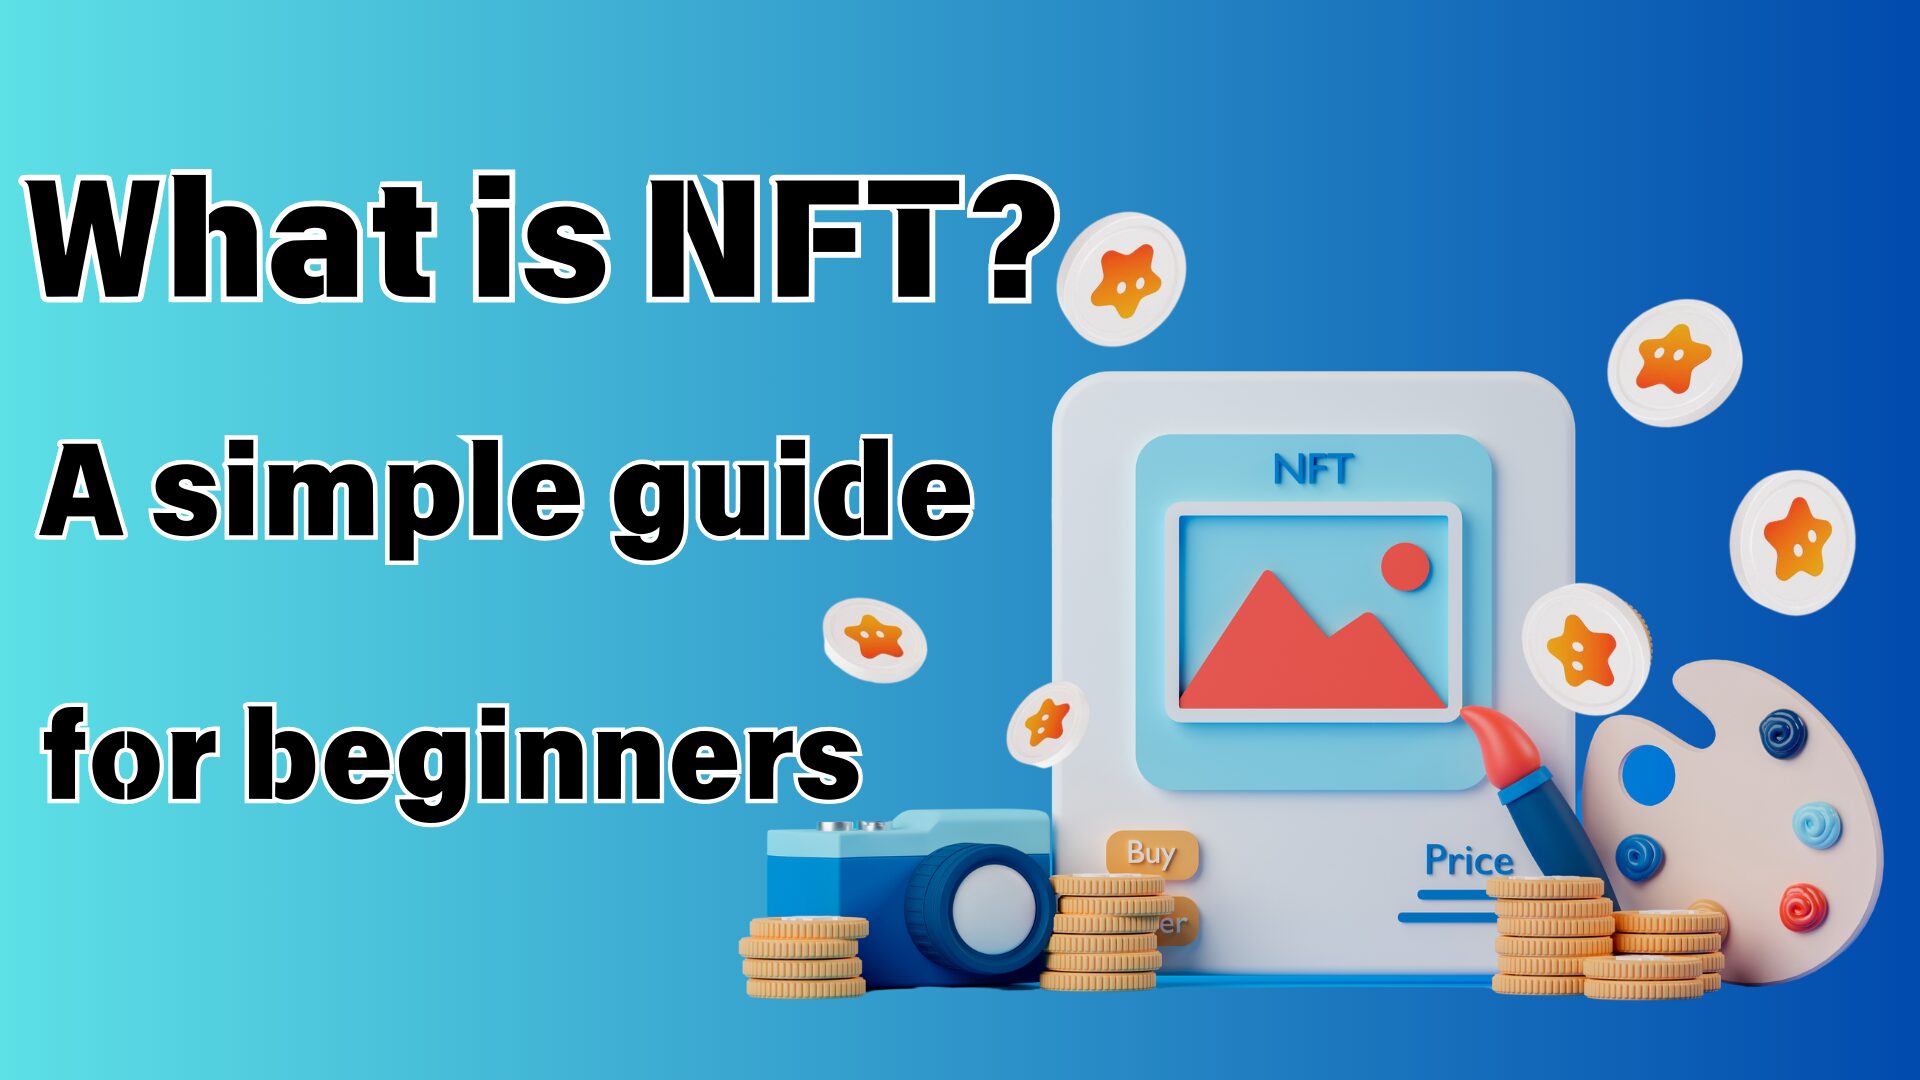 What is NFT? A simple guide for beginners